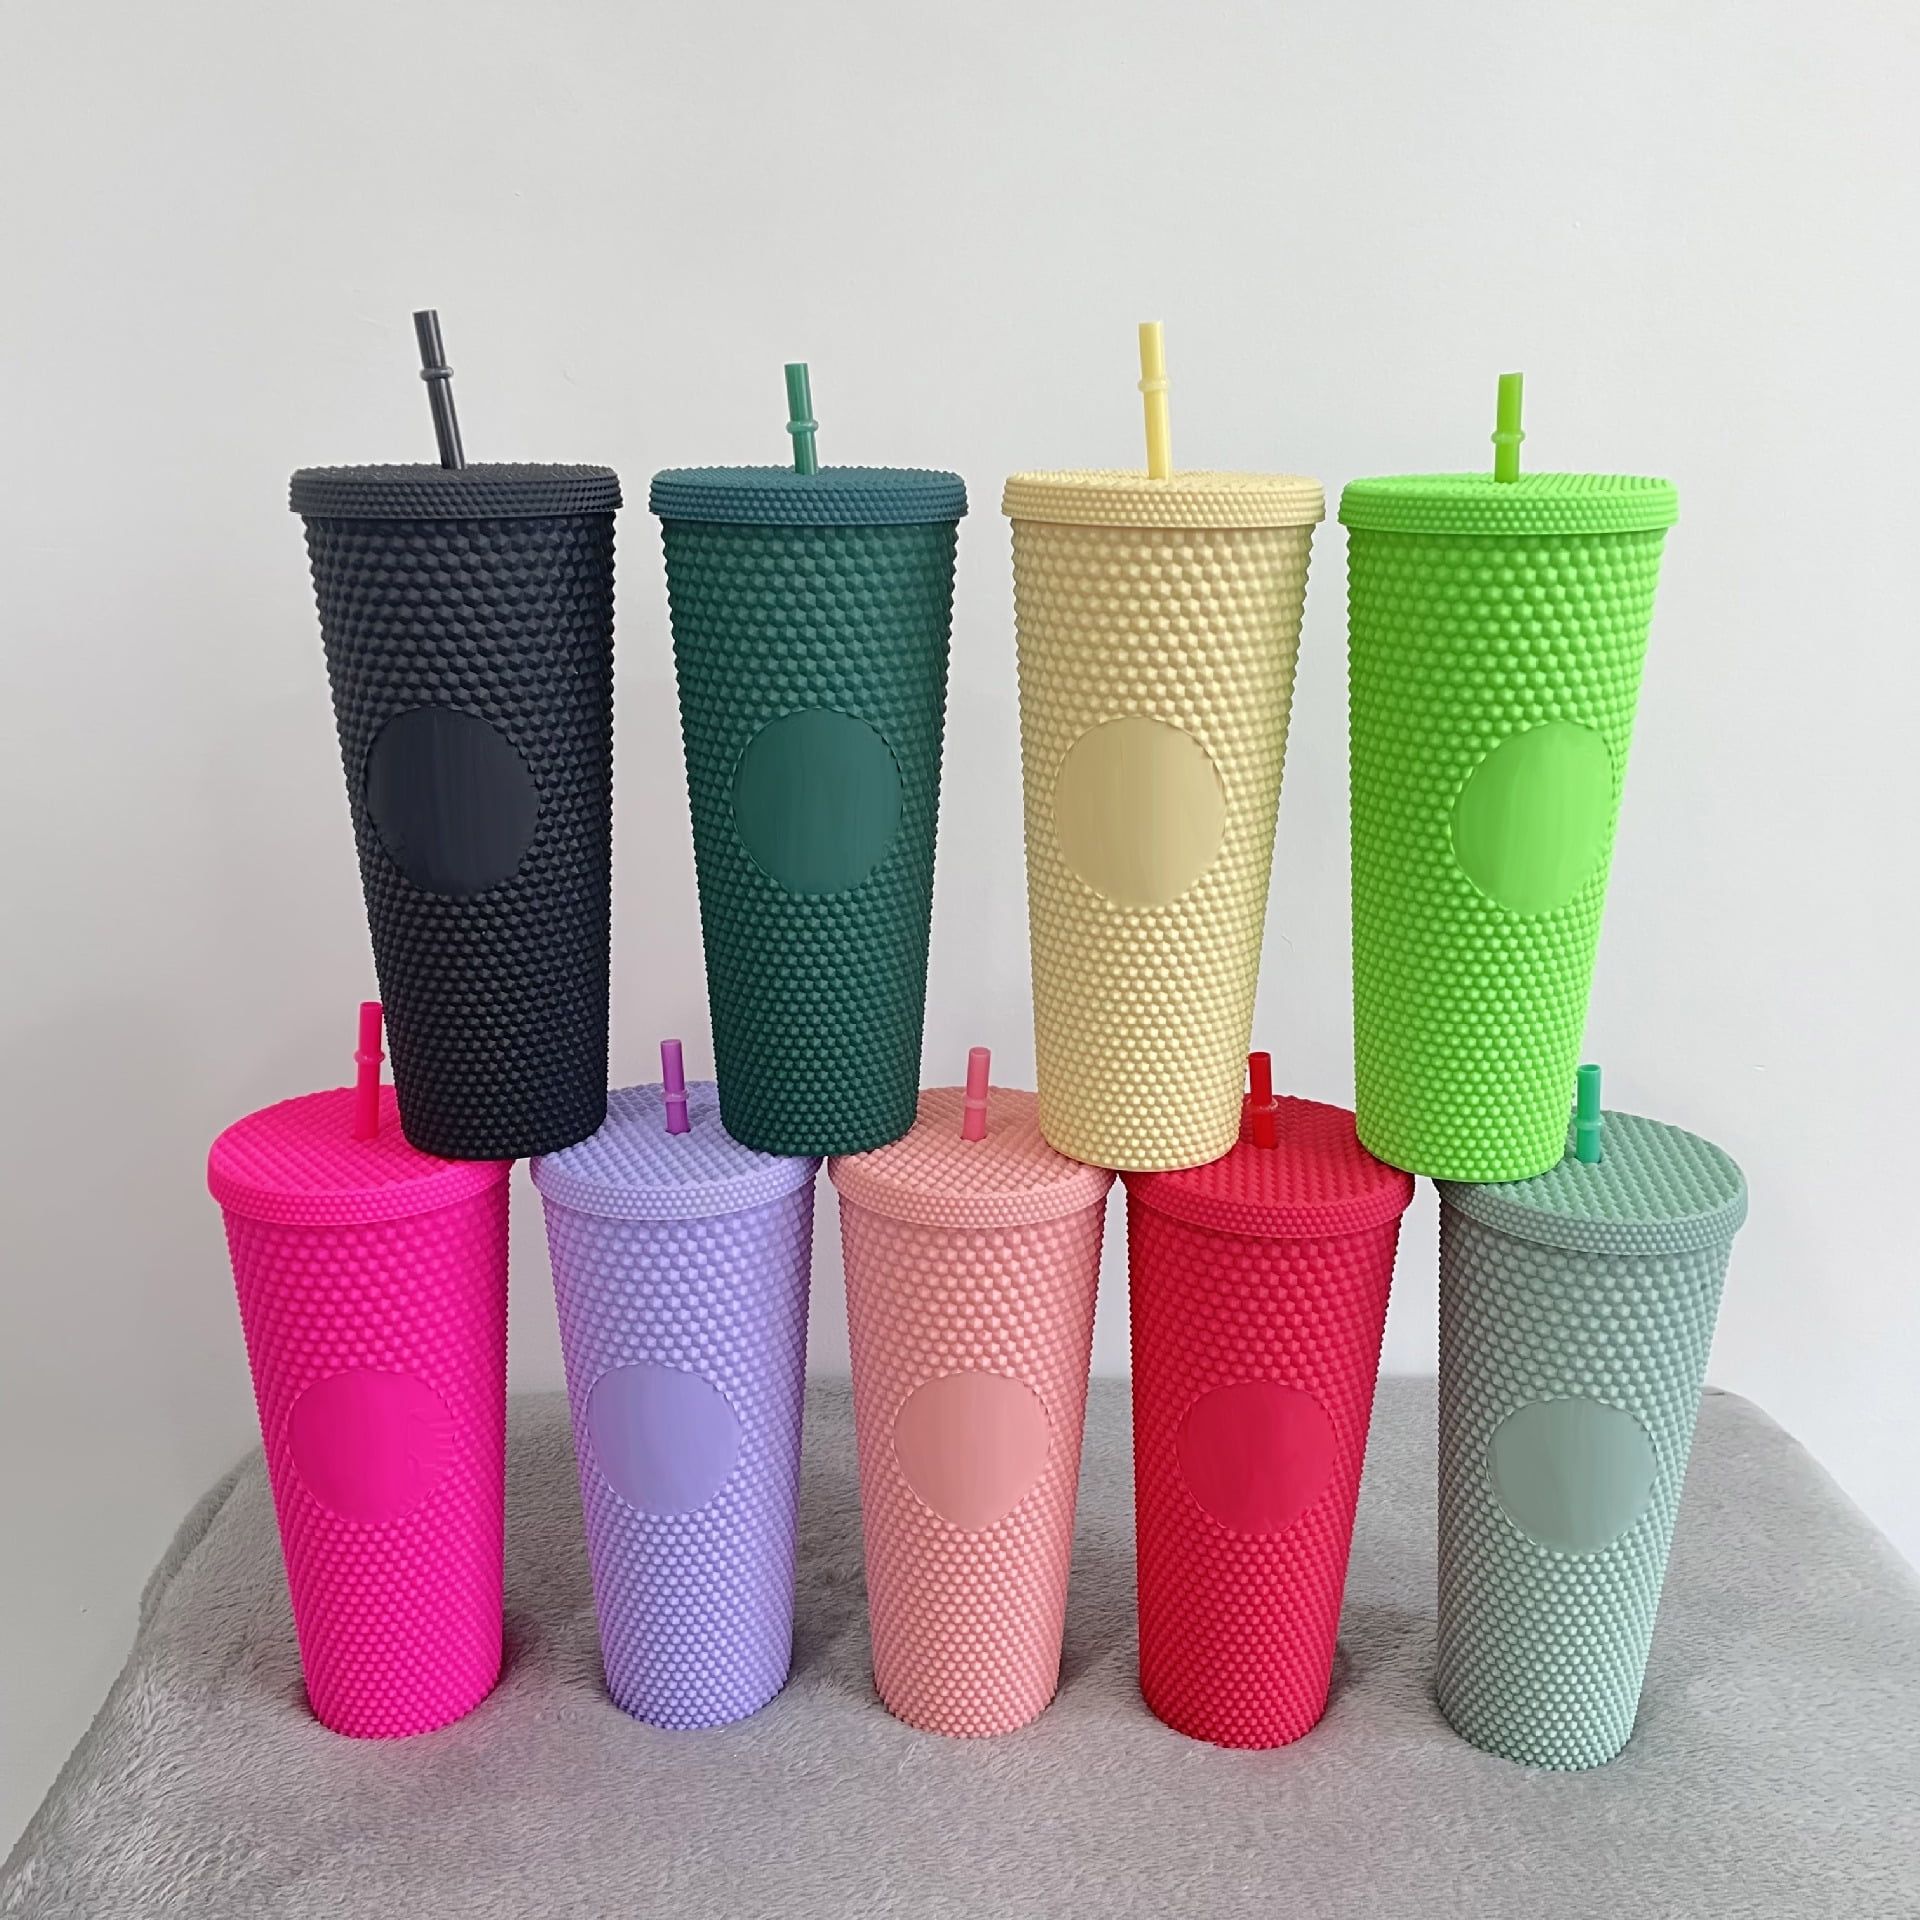 Happon 1 Pc Studded Tumbler with Lid & Straw, Plastic Cup for Iced